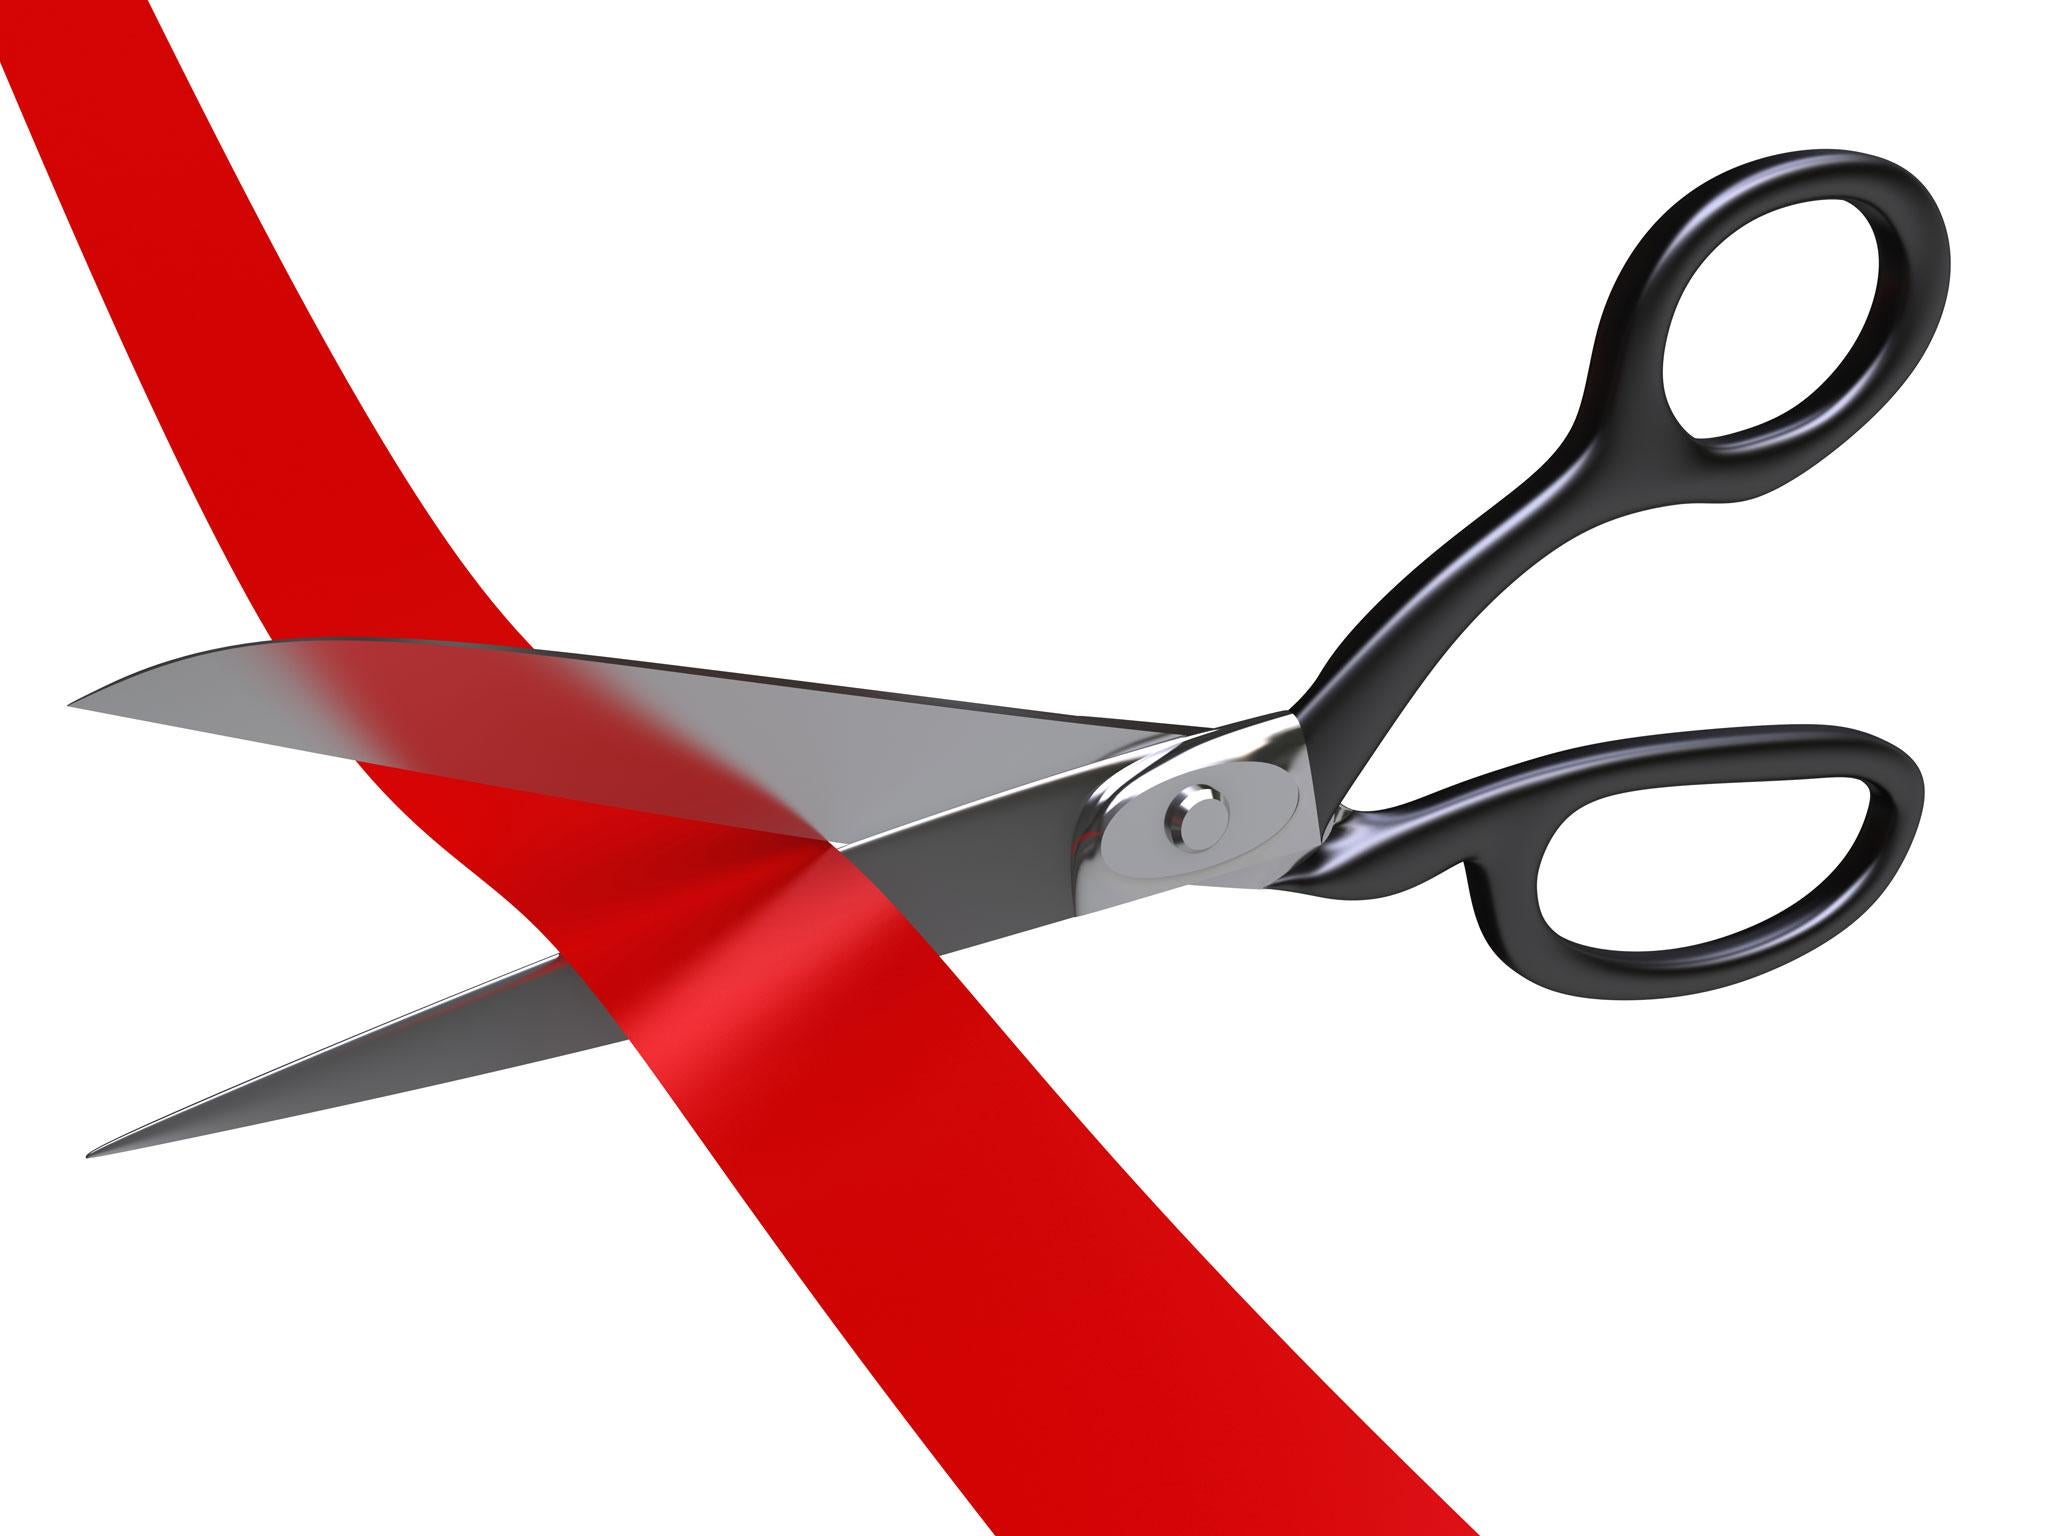 Cutting red tape, or ignoring it, can come at a heavy cost